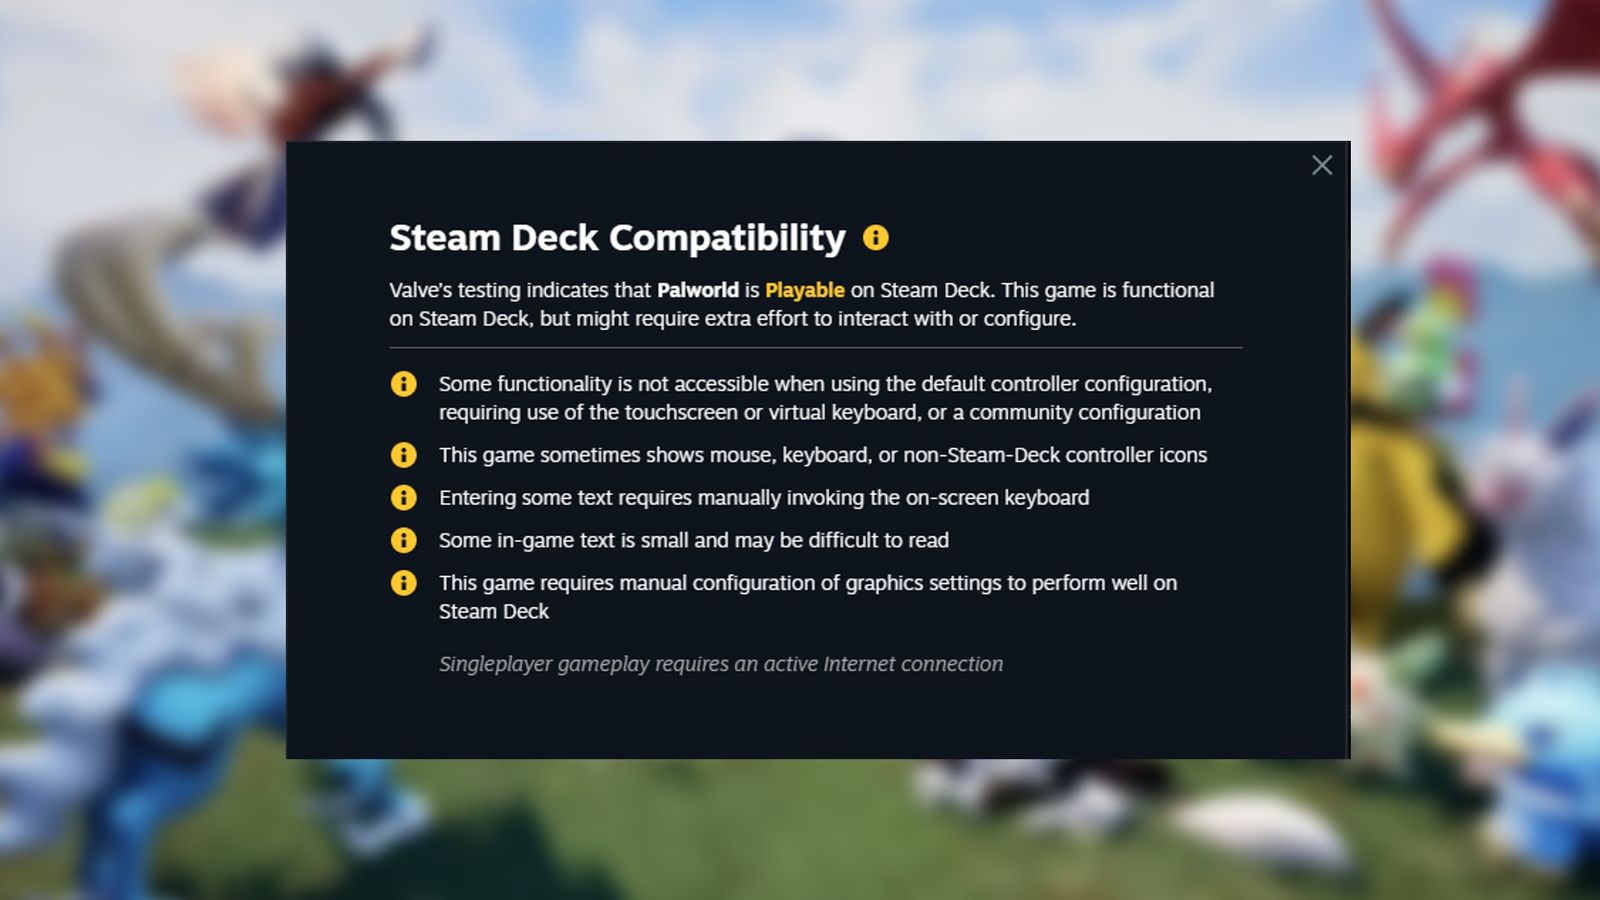 Steam Deck compatibility status for Palworld on top of a blurred Palworld image